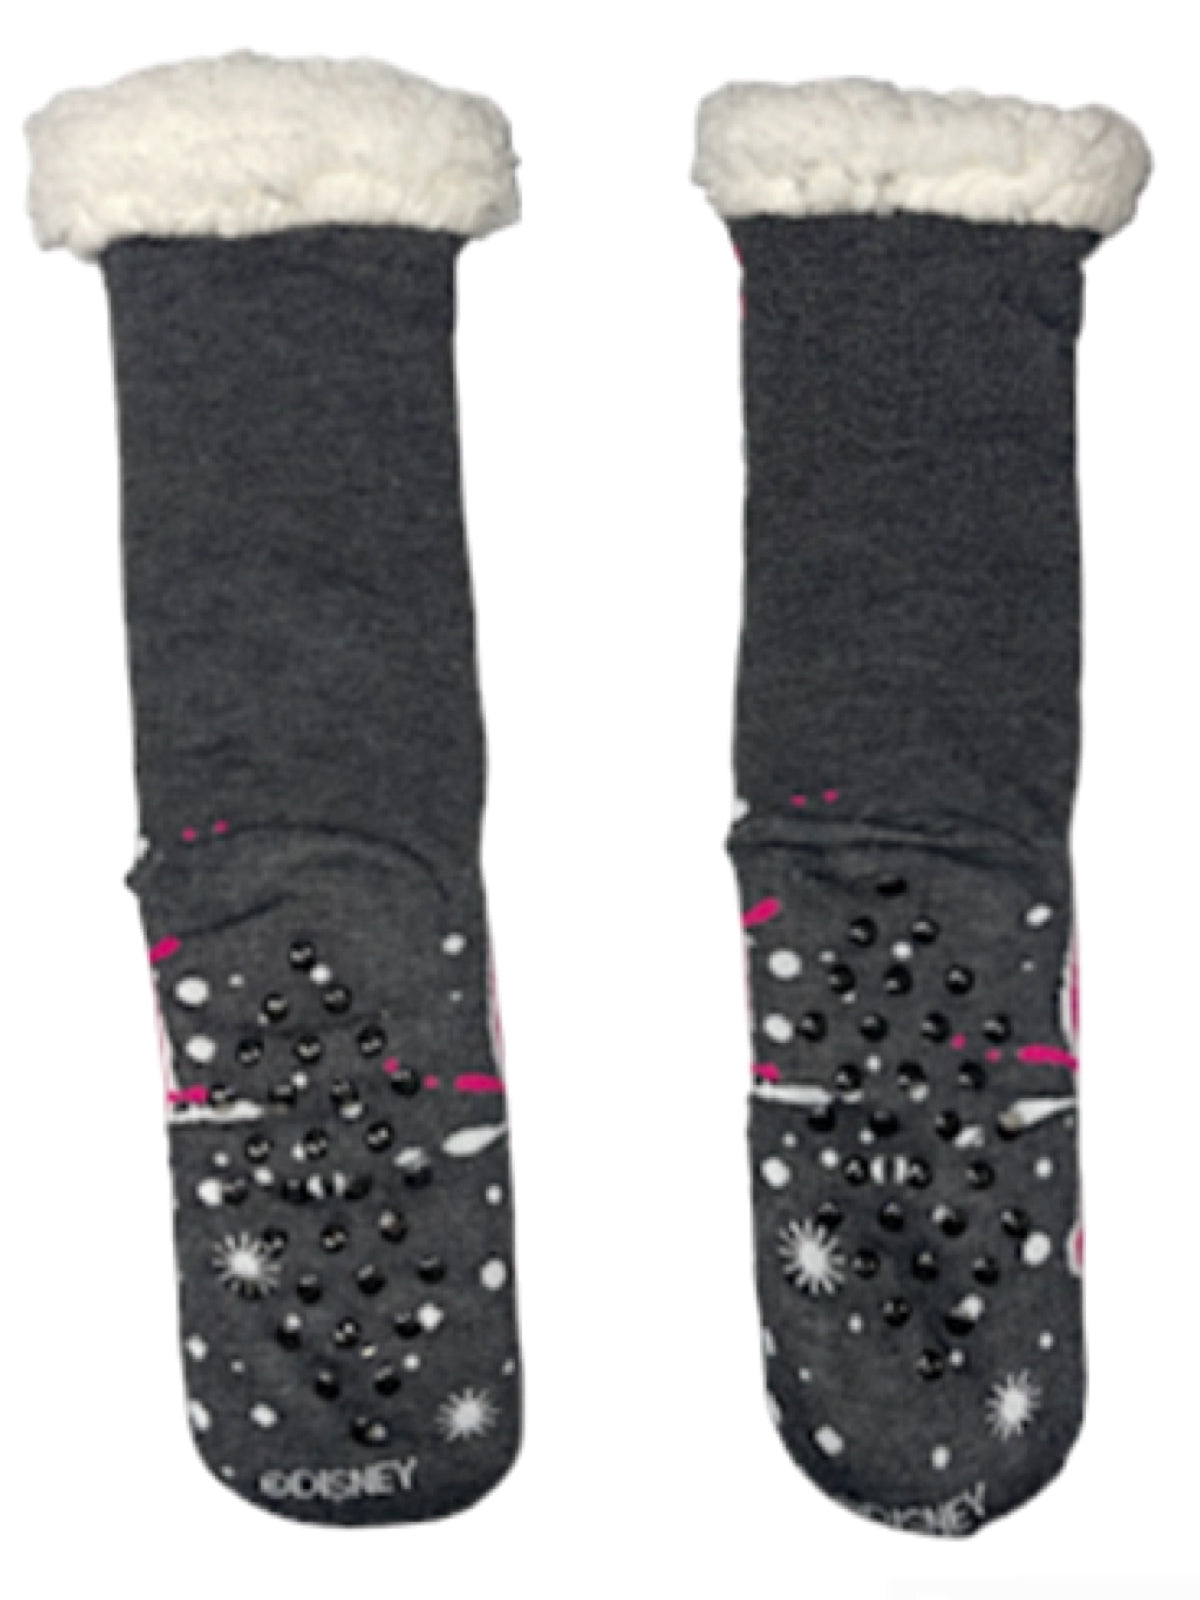 Sherpa Slippers Socks with Gripper